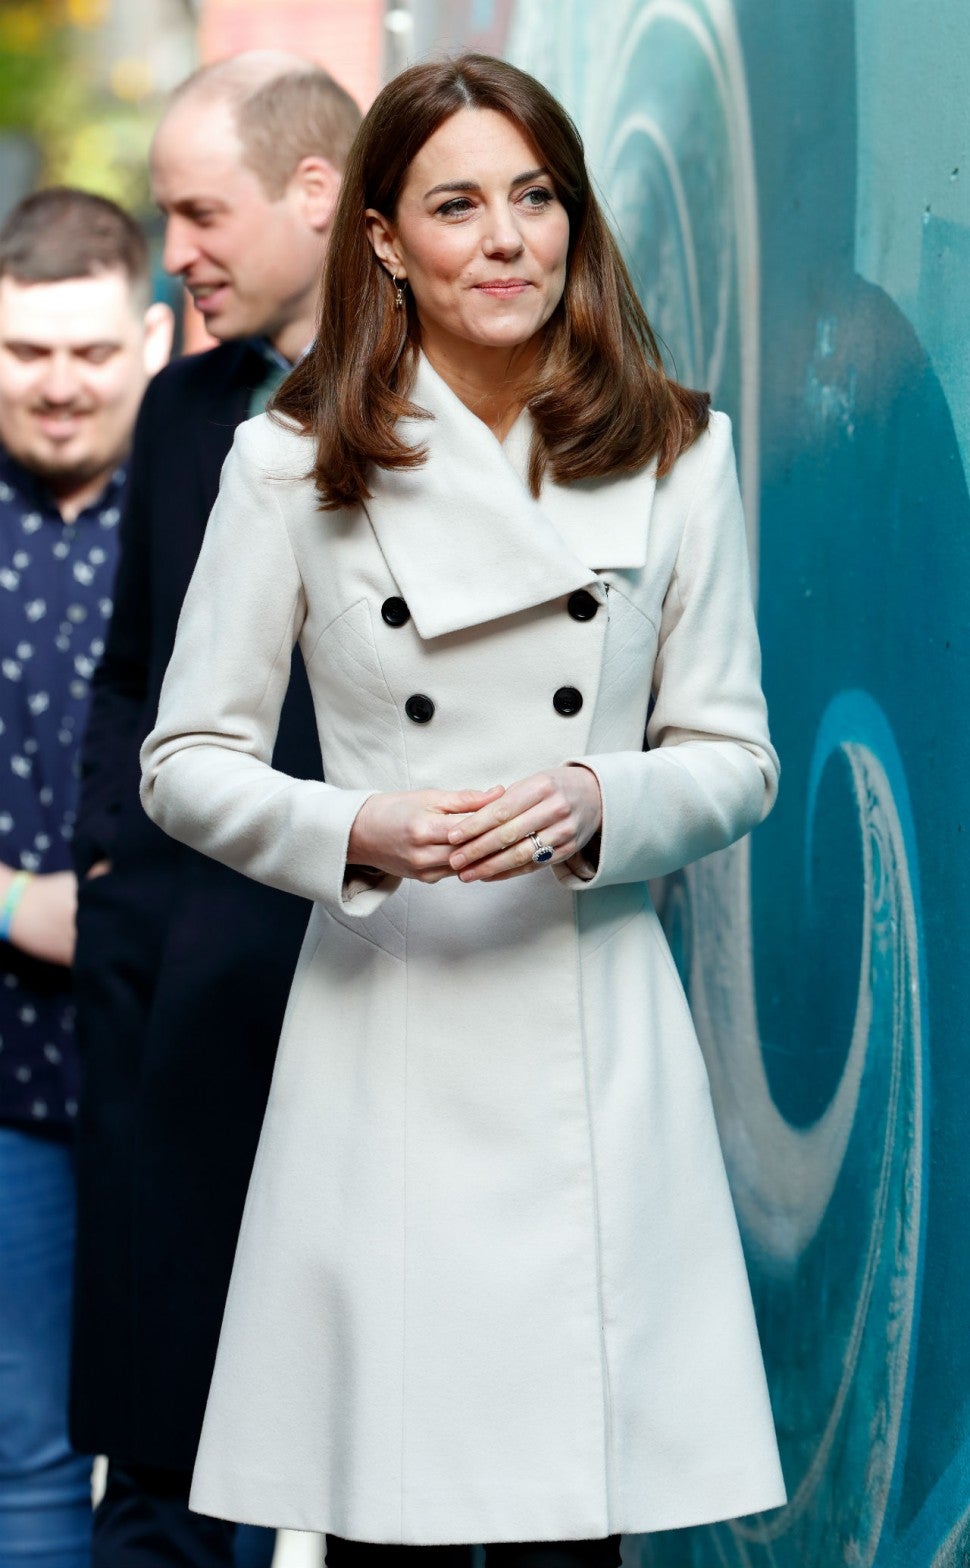 kate full gettyimages 1205046338